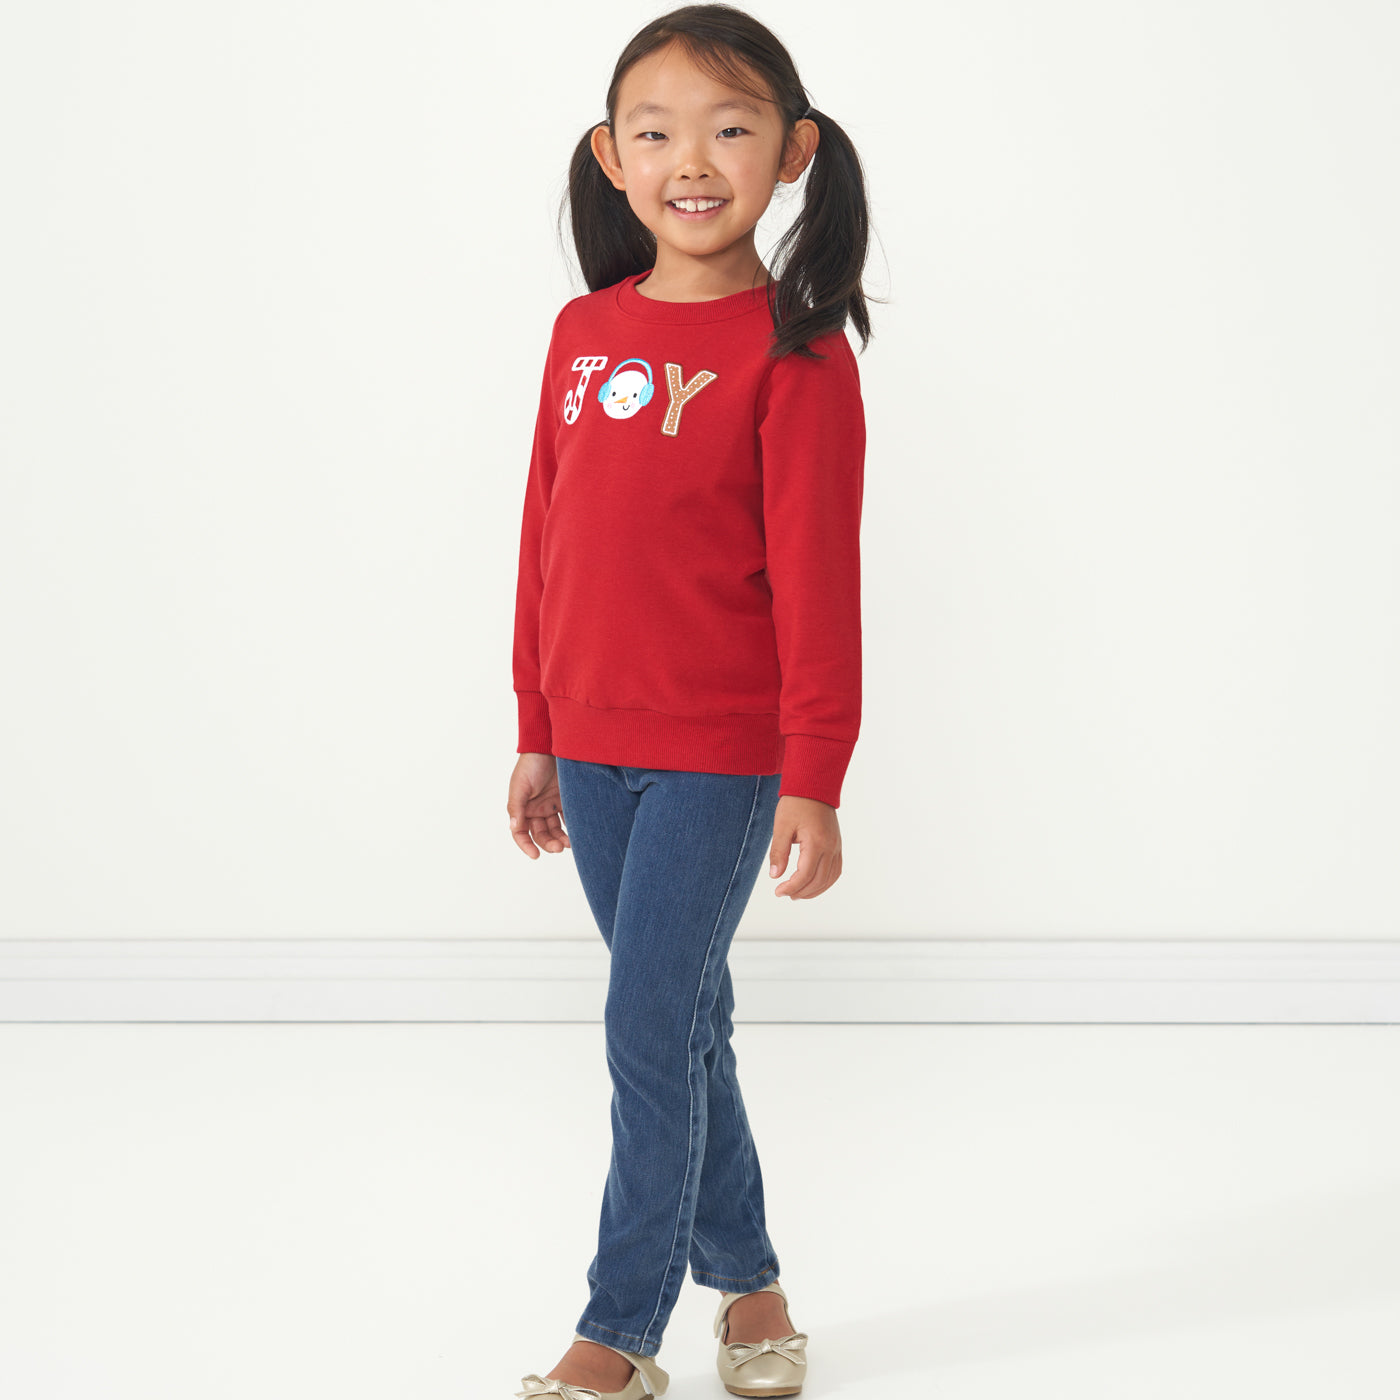 Profile view of a child wearing a Holiday Red Joy crewneck